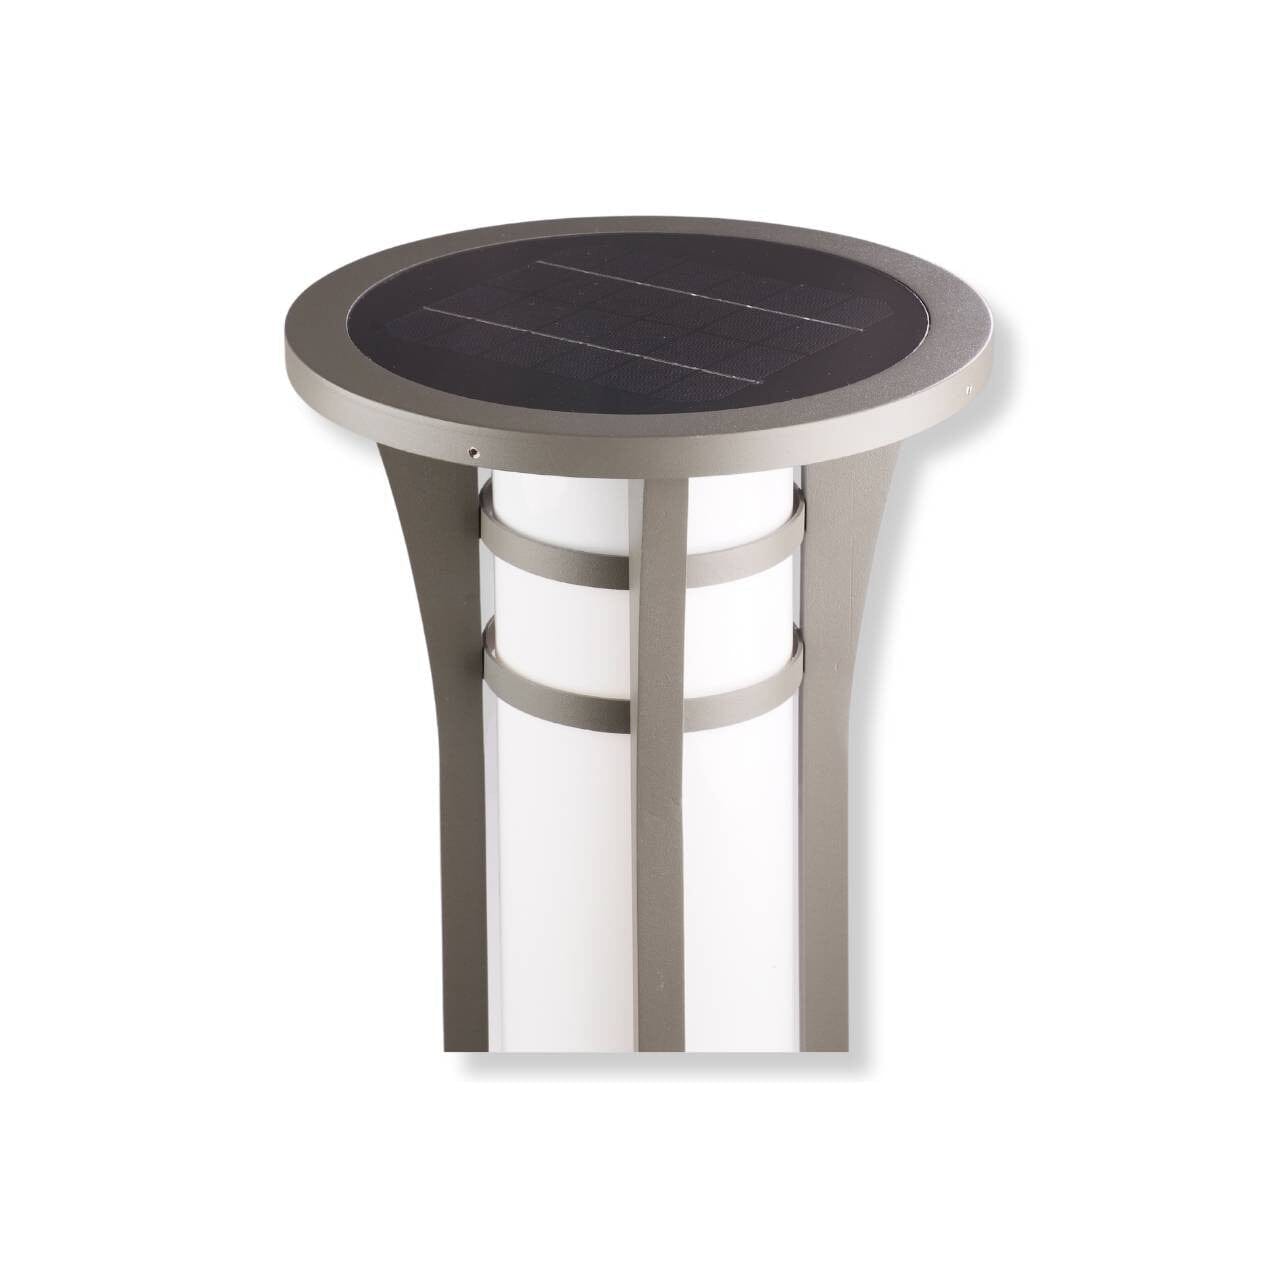 Column Solar Bollard Light - Warm and Bright White Options with Remote